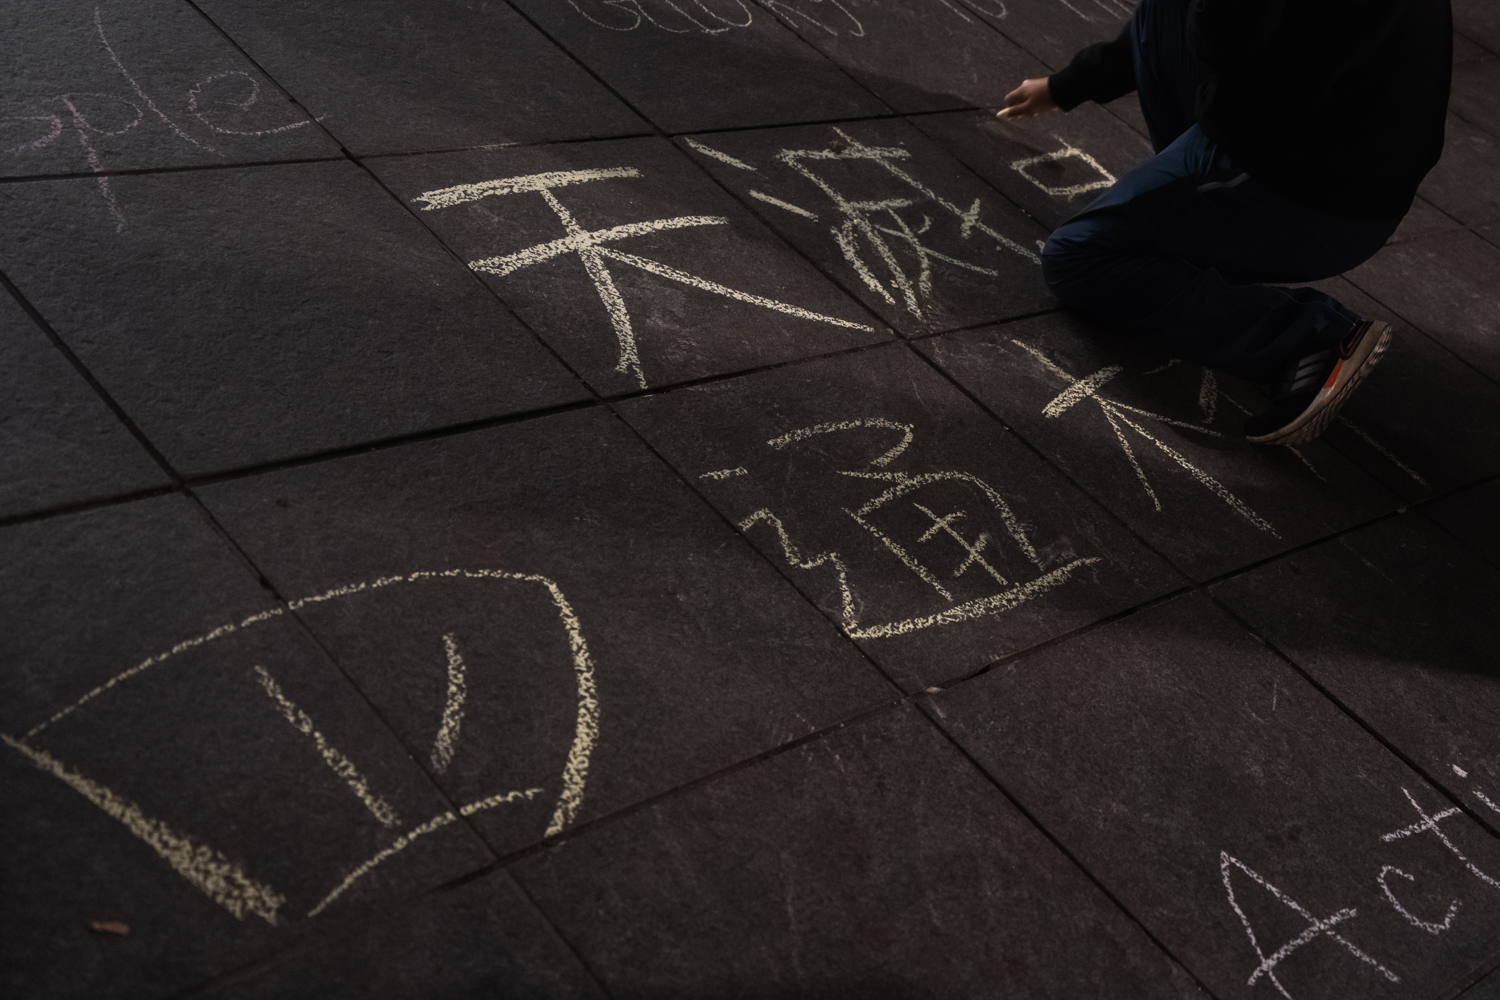 A person kneeling down on the ground while writing with yellow chalk. Next to him on the ground is chalk writing of “Sitong Bridge” in Chinese.